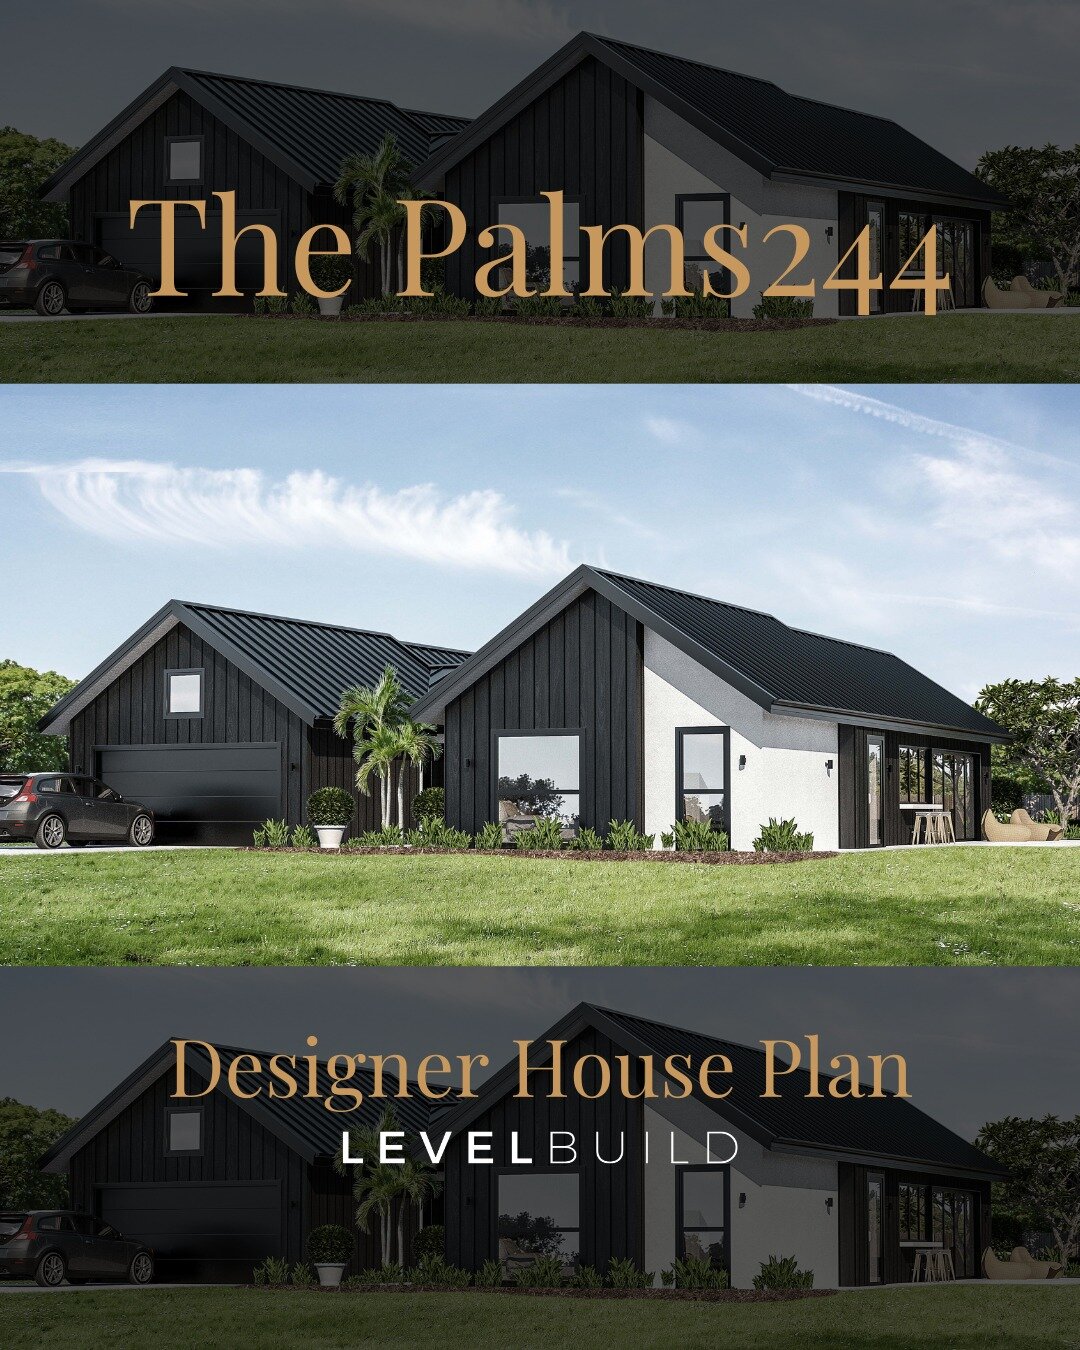 ✨ Want more than the usual 'cookie-cutter' design for your home? 🏡 

If you&rsquo;re looking to build a home in Taranaki for your growing family that stands out from the rest, The Palms244 Designer House Plan may be just the perfect fit for you 🏡 
